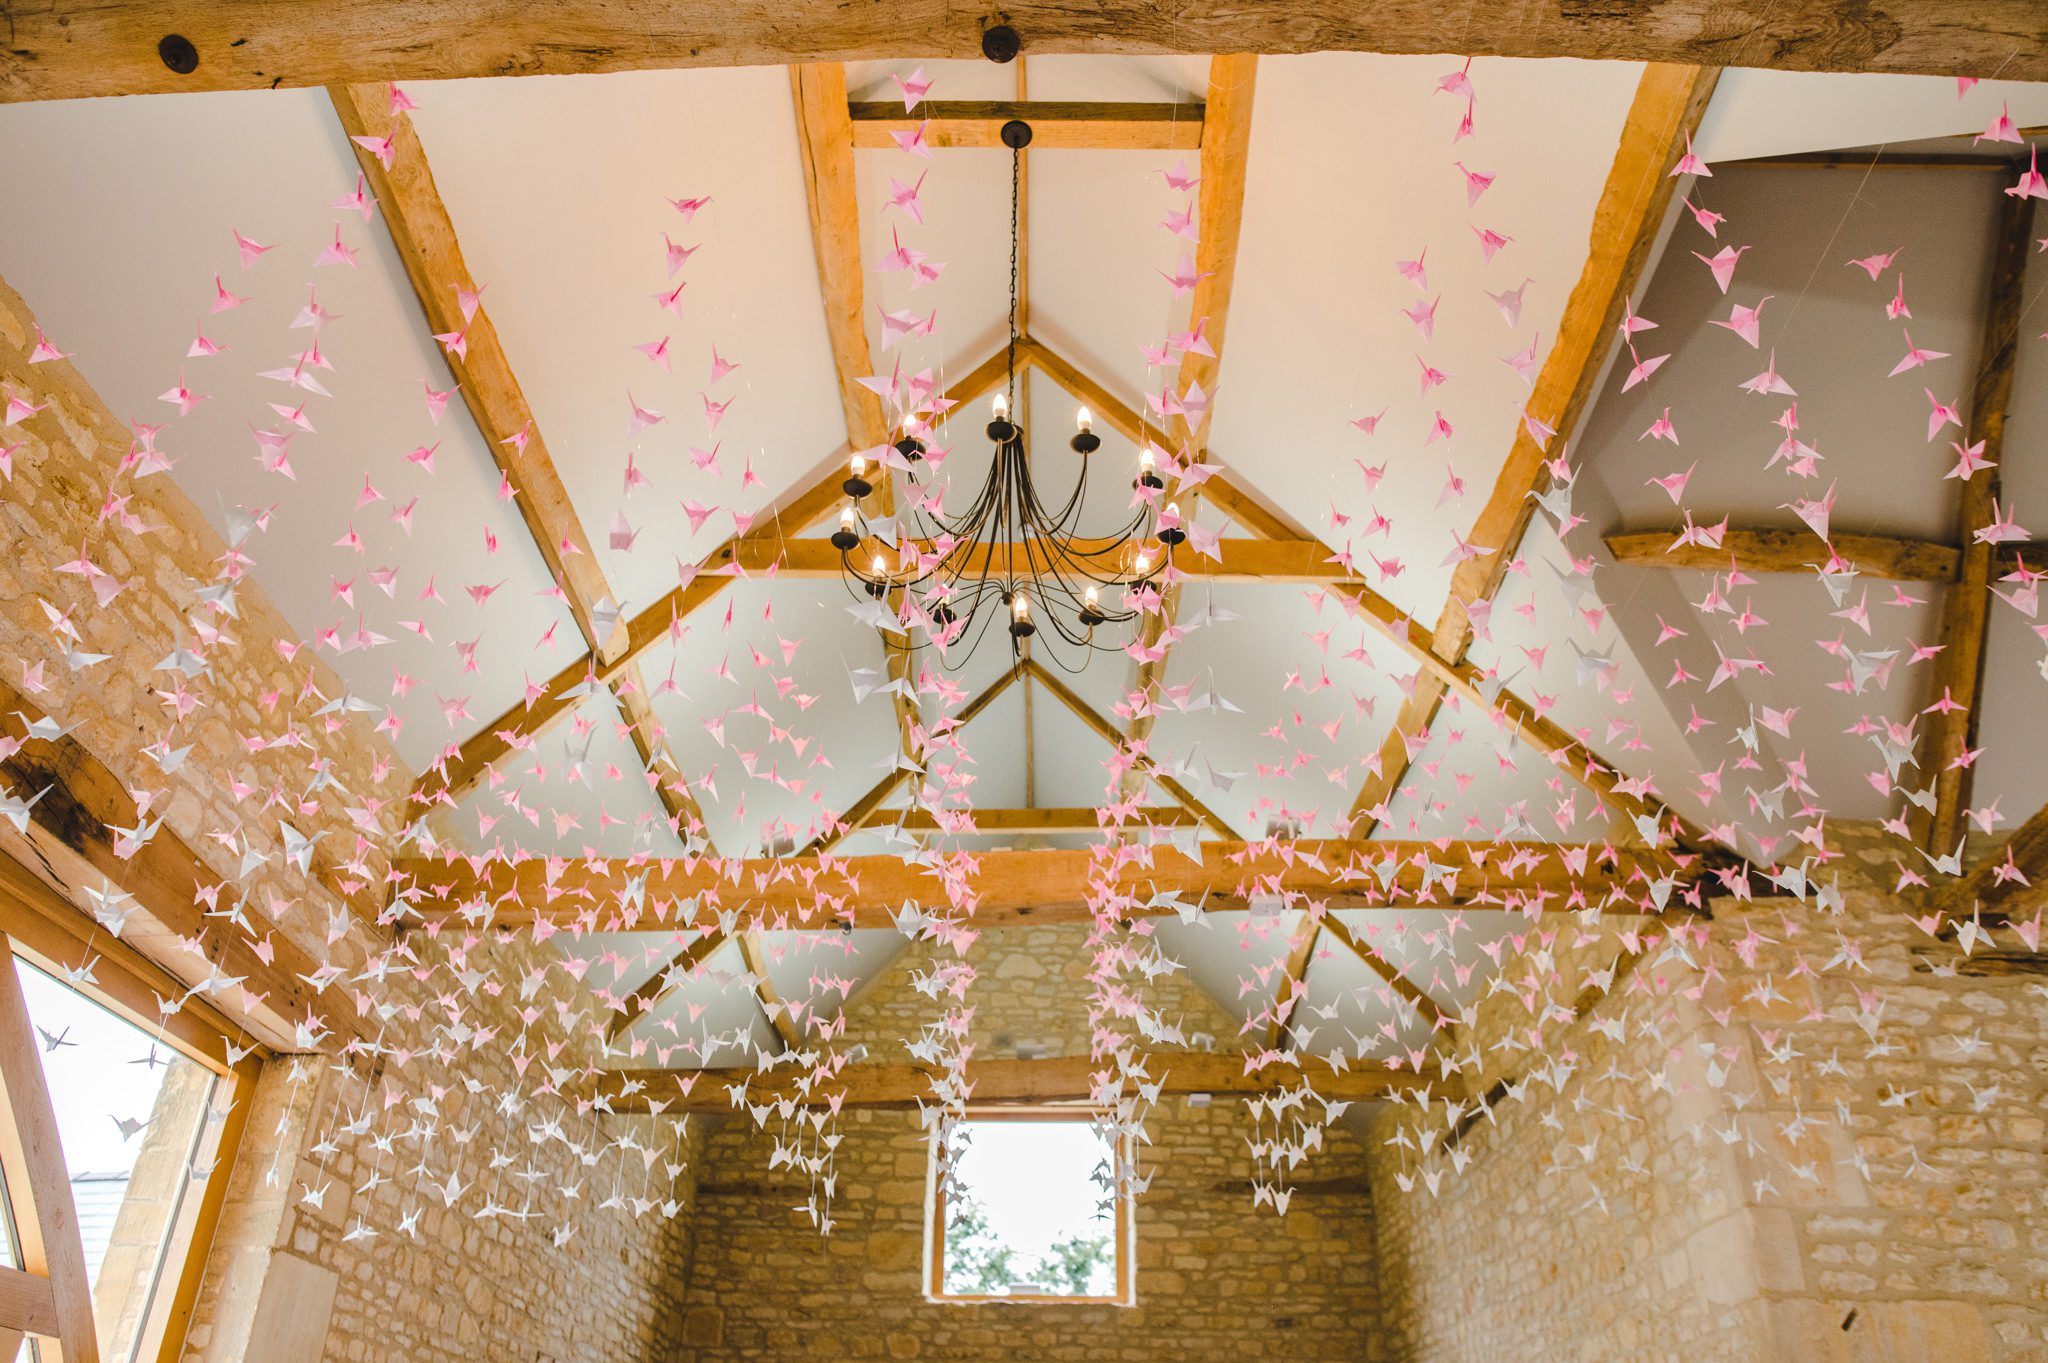 Cranes hanging from the ceiling at Upcote Barn